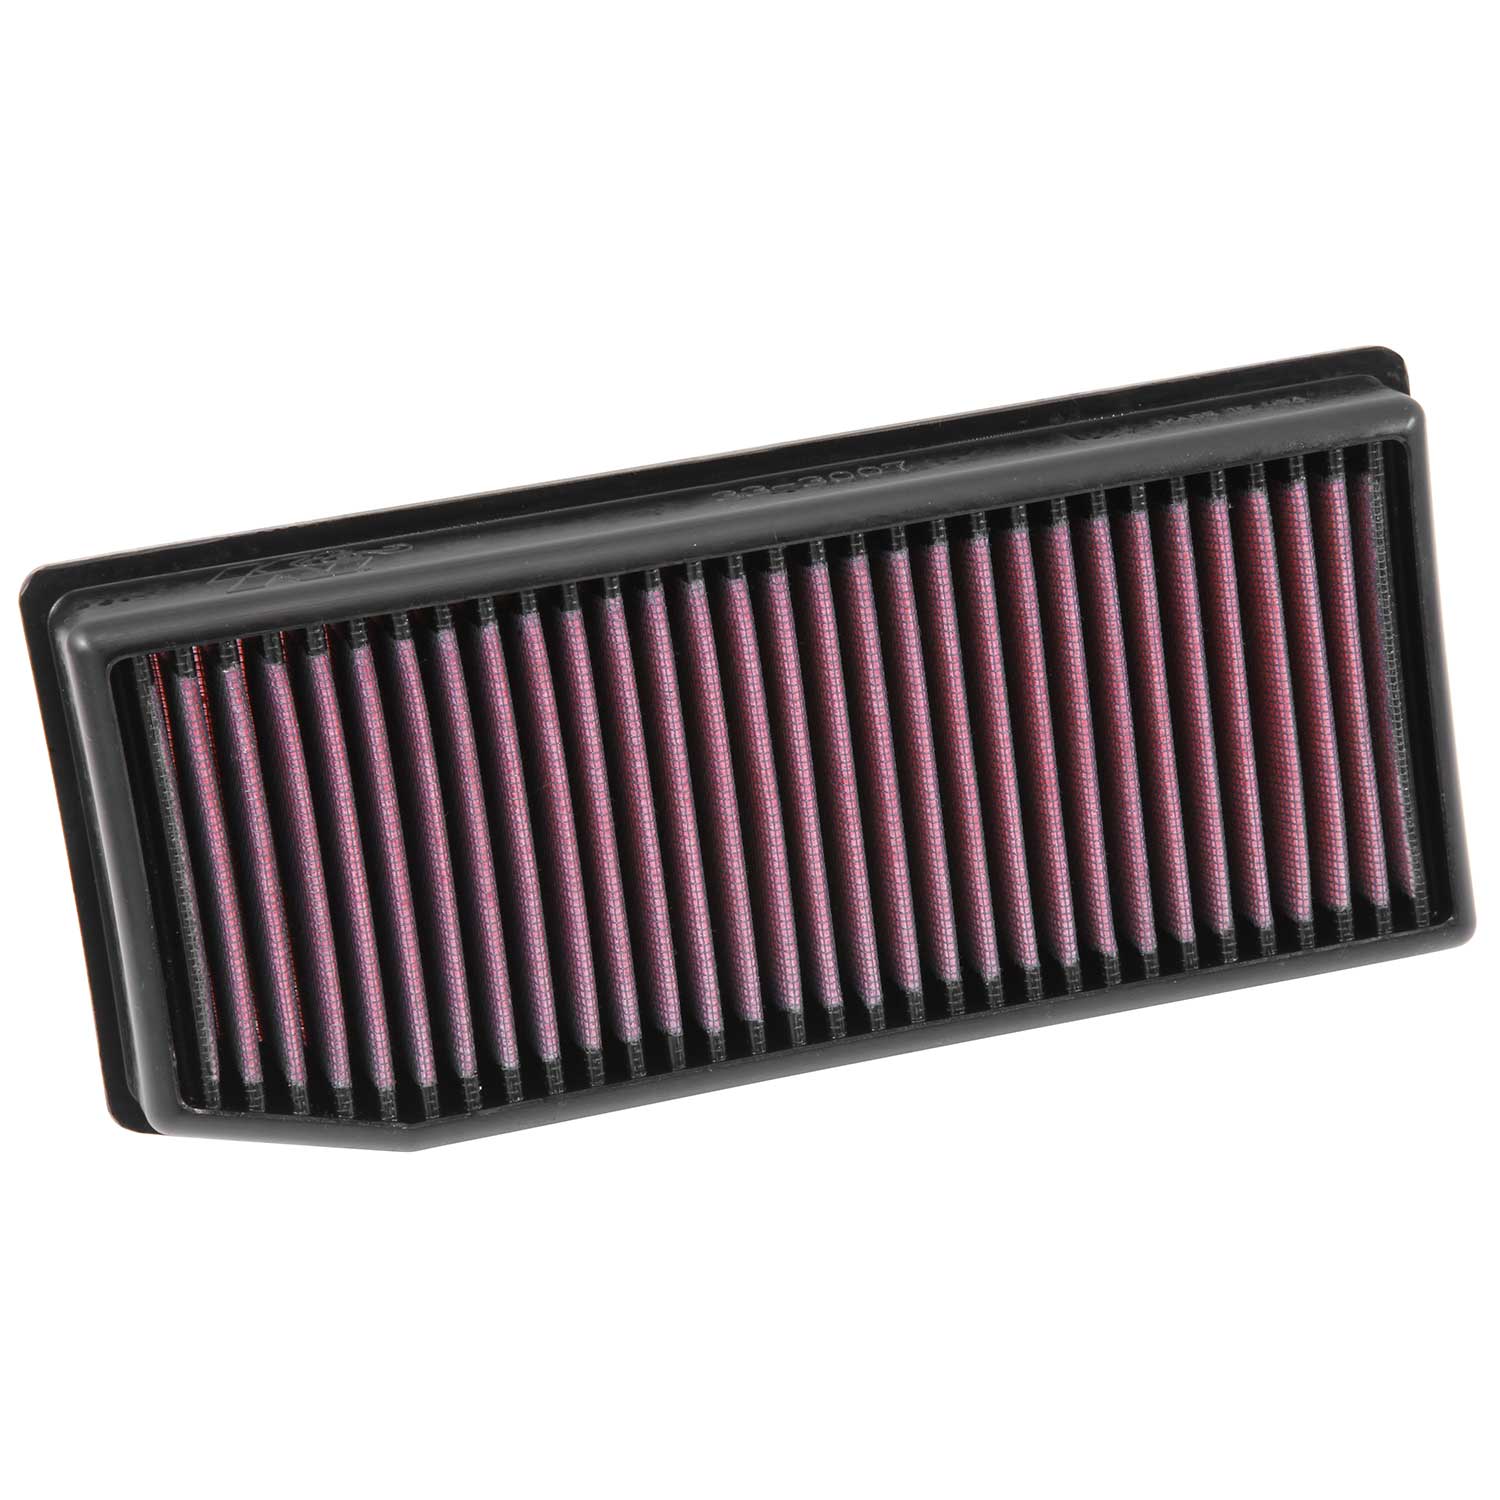 K&N Engine Air Filter: Reusable, Clean Every 75,000 Miles, Washable,  Premium, Replacement Car Air Filter: Compatible with 2012-2104 Honda CR-V  L4